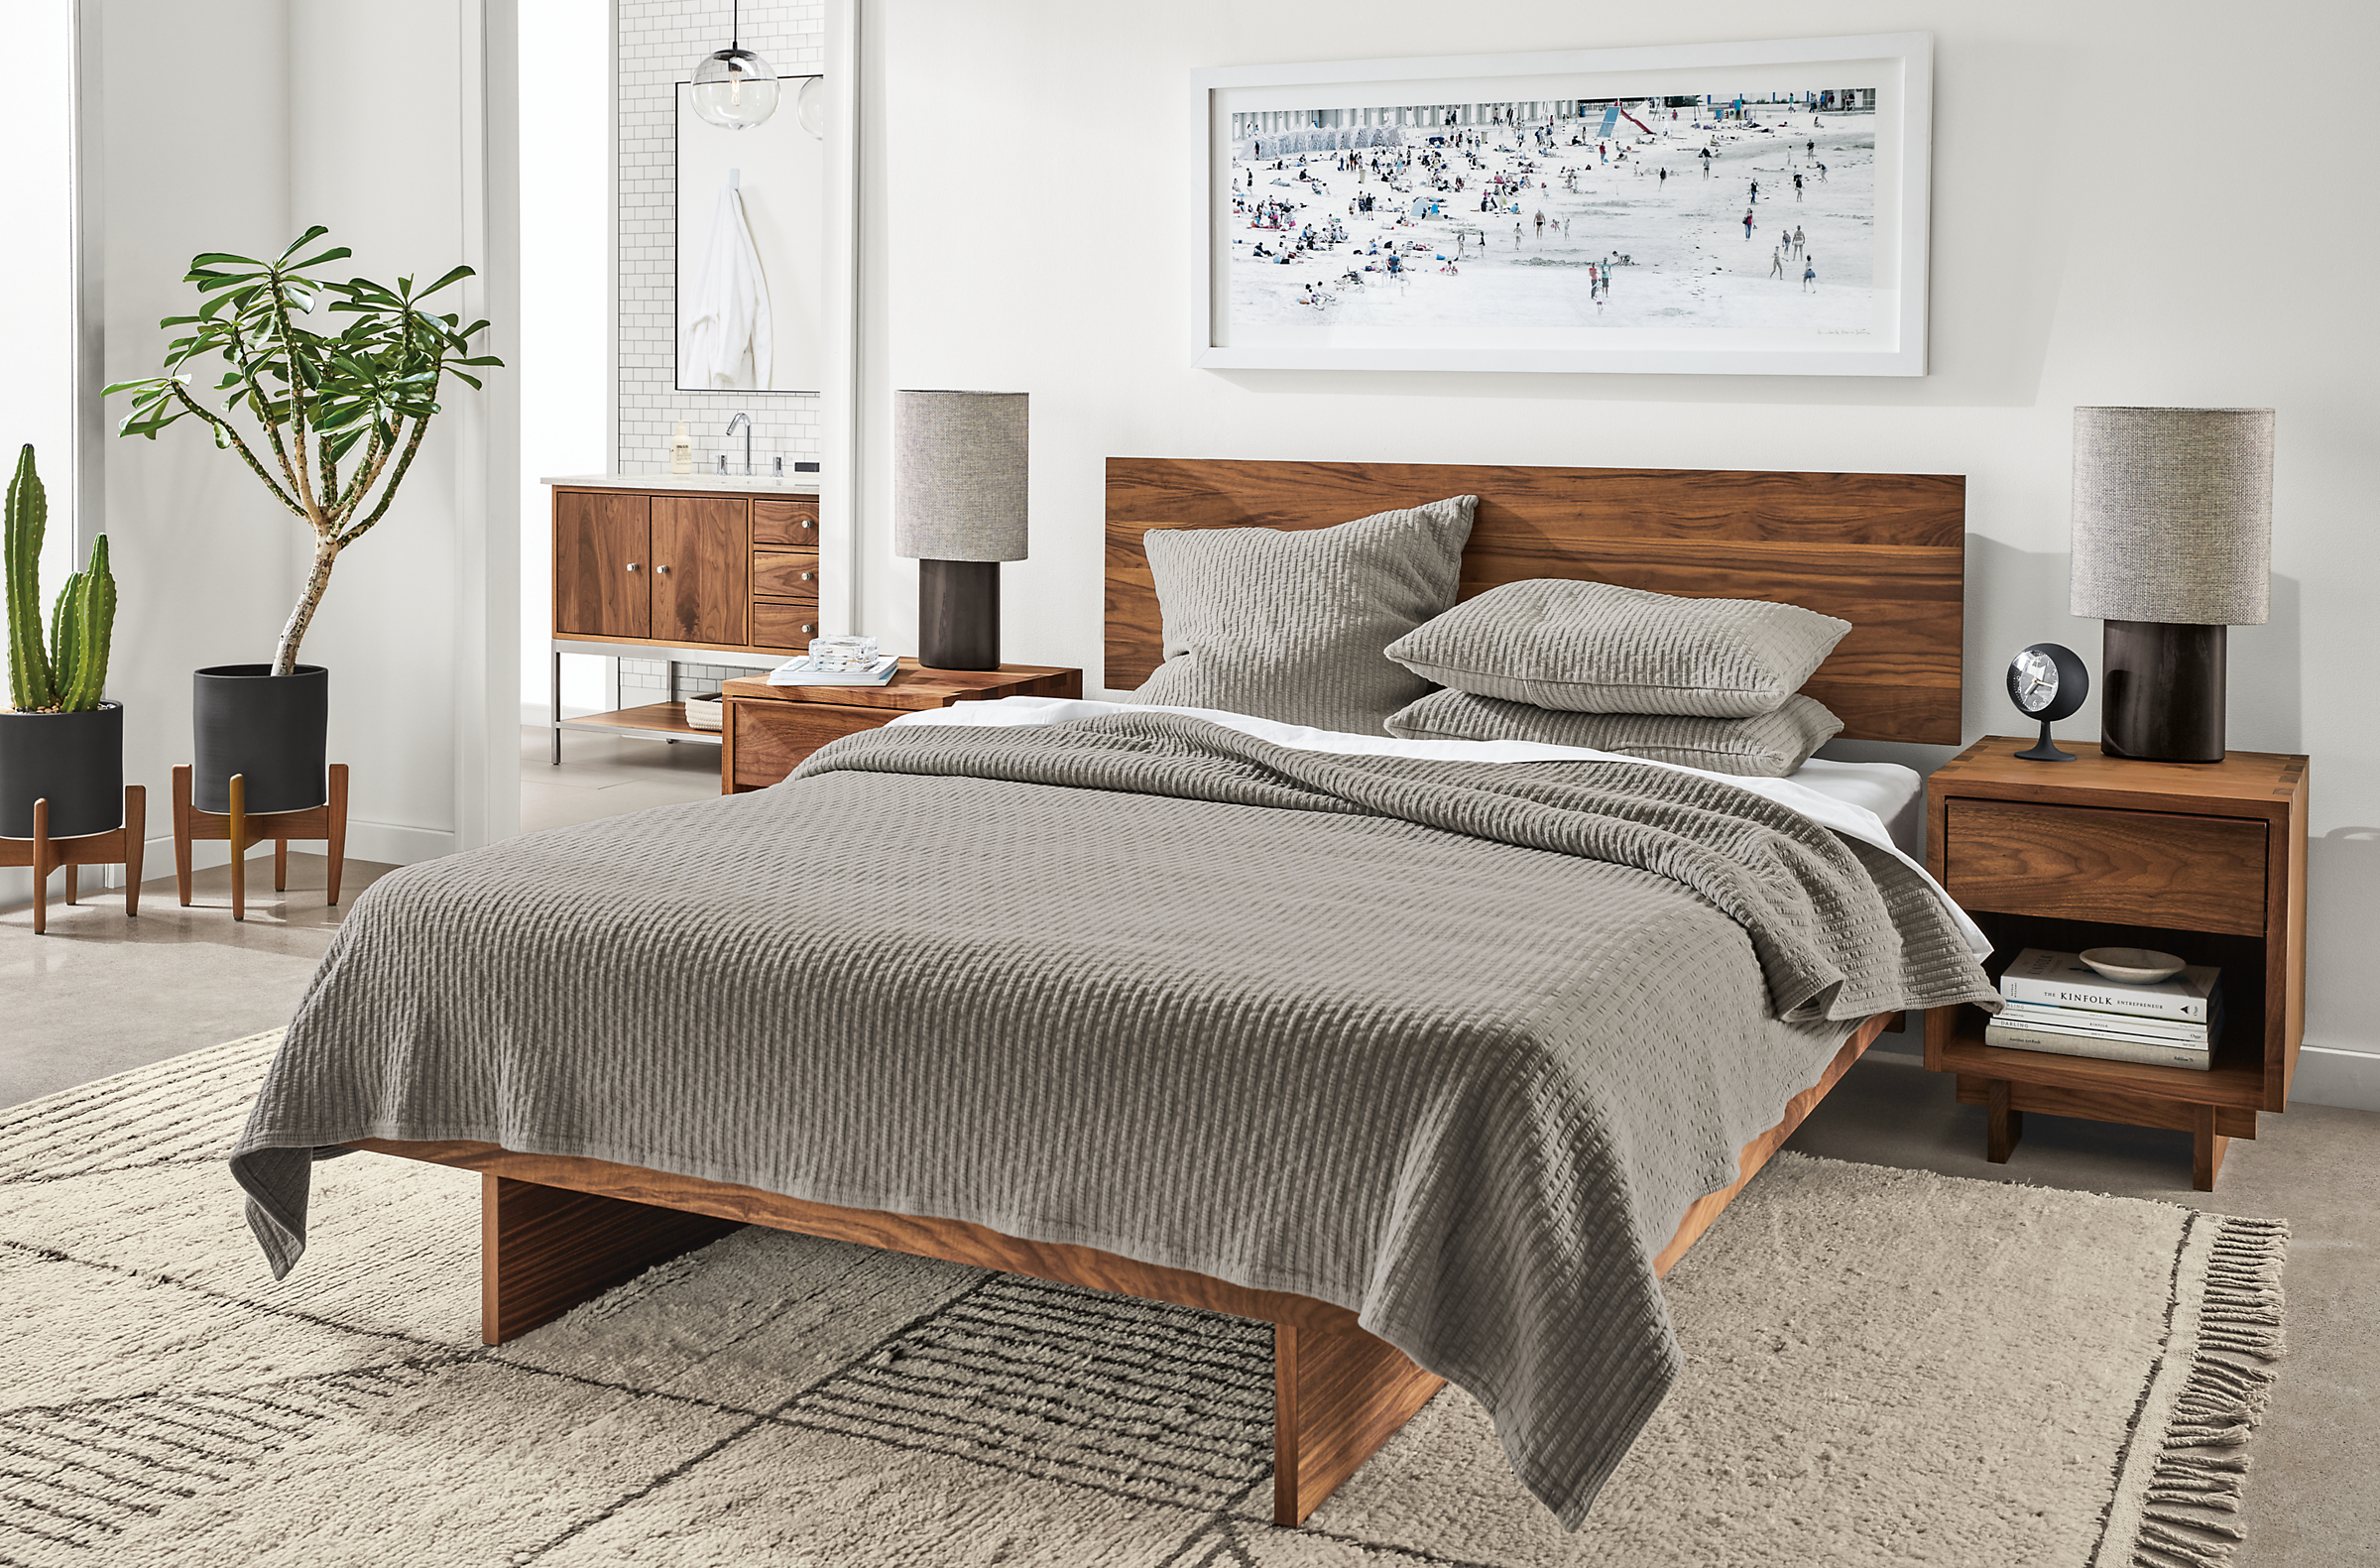 Kennewick grey coverlet on Hudson bed.